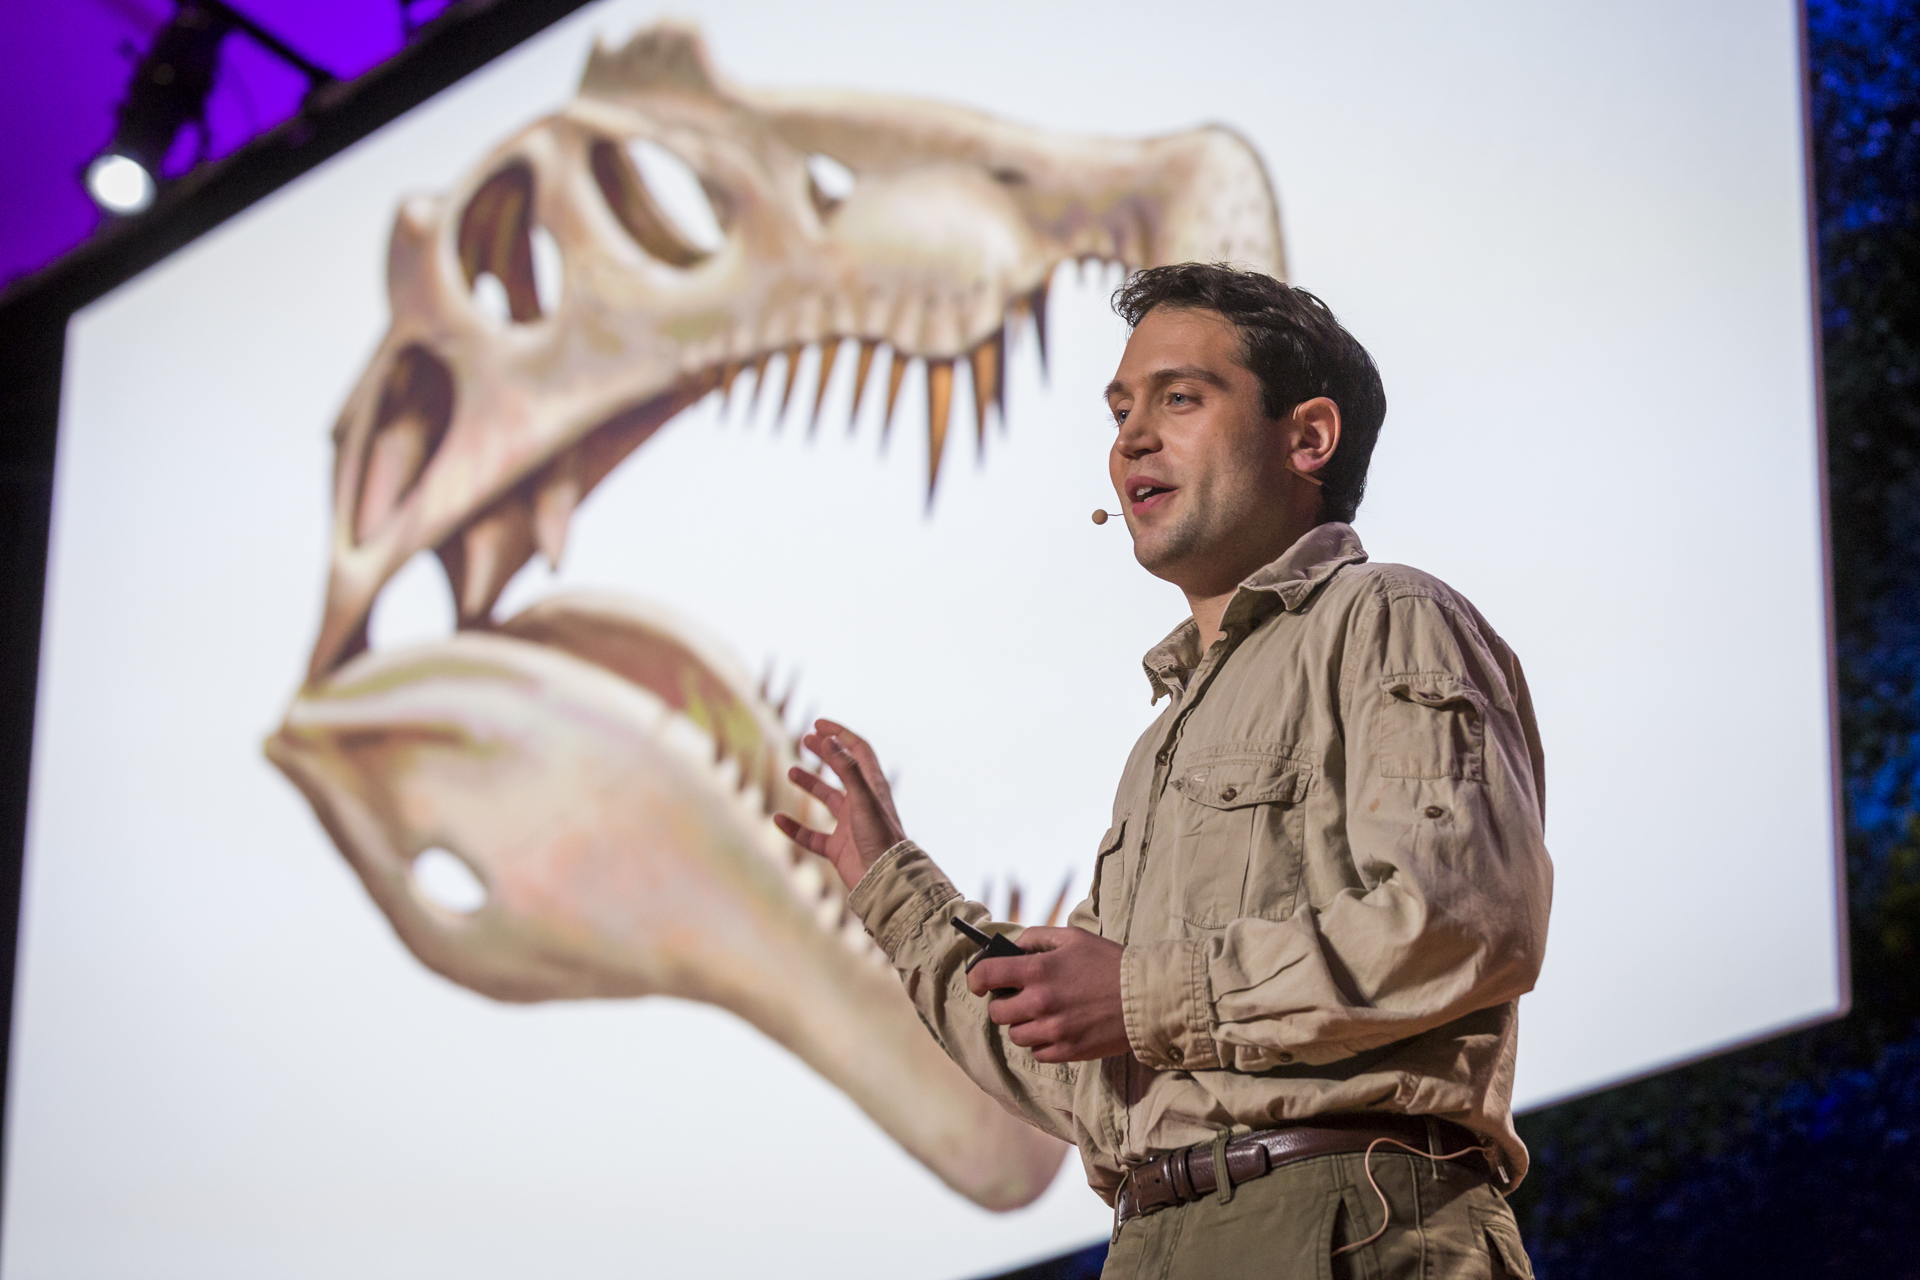 Paleontologist Nizar Ibrahim tells the story of how he discovered the Spinosaurus, which may have been the largest carnivorous dinosaur to ever live. Oh, and it lived in the water. Photo: Ryan Lash/TED